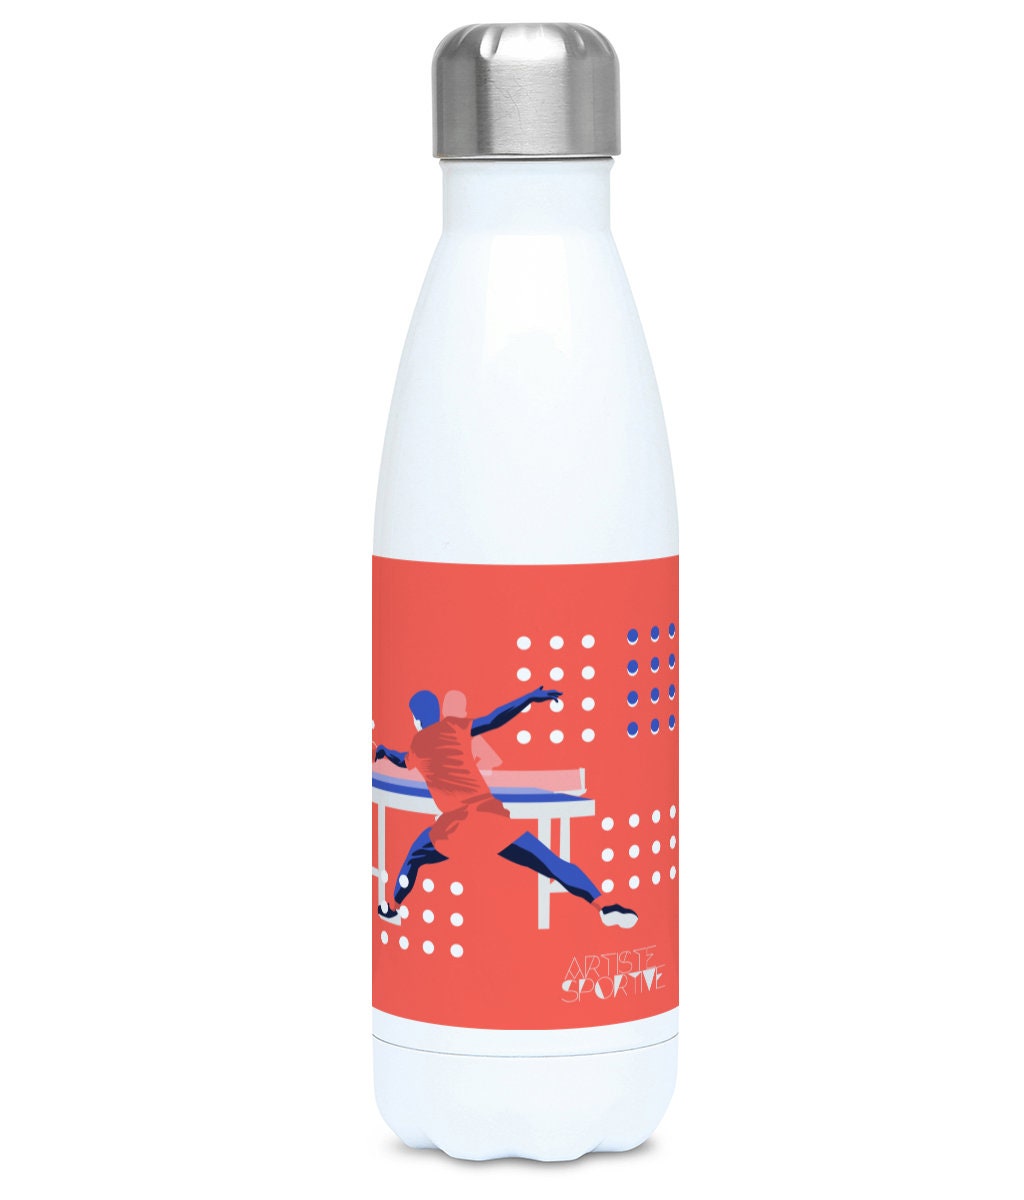 Ping Pong insulated bottle "Orange table tennis" - Customizable